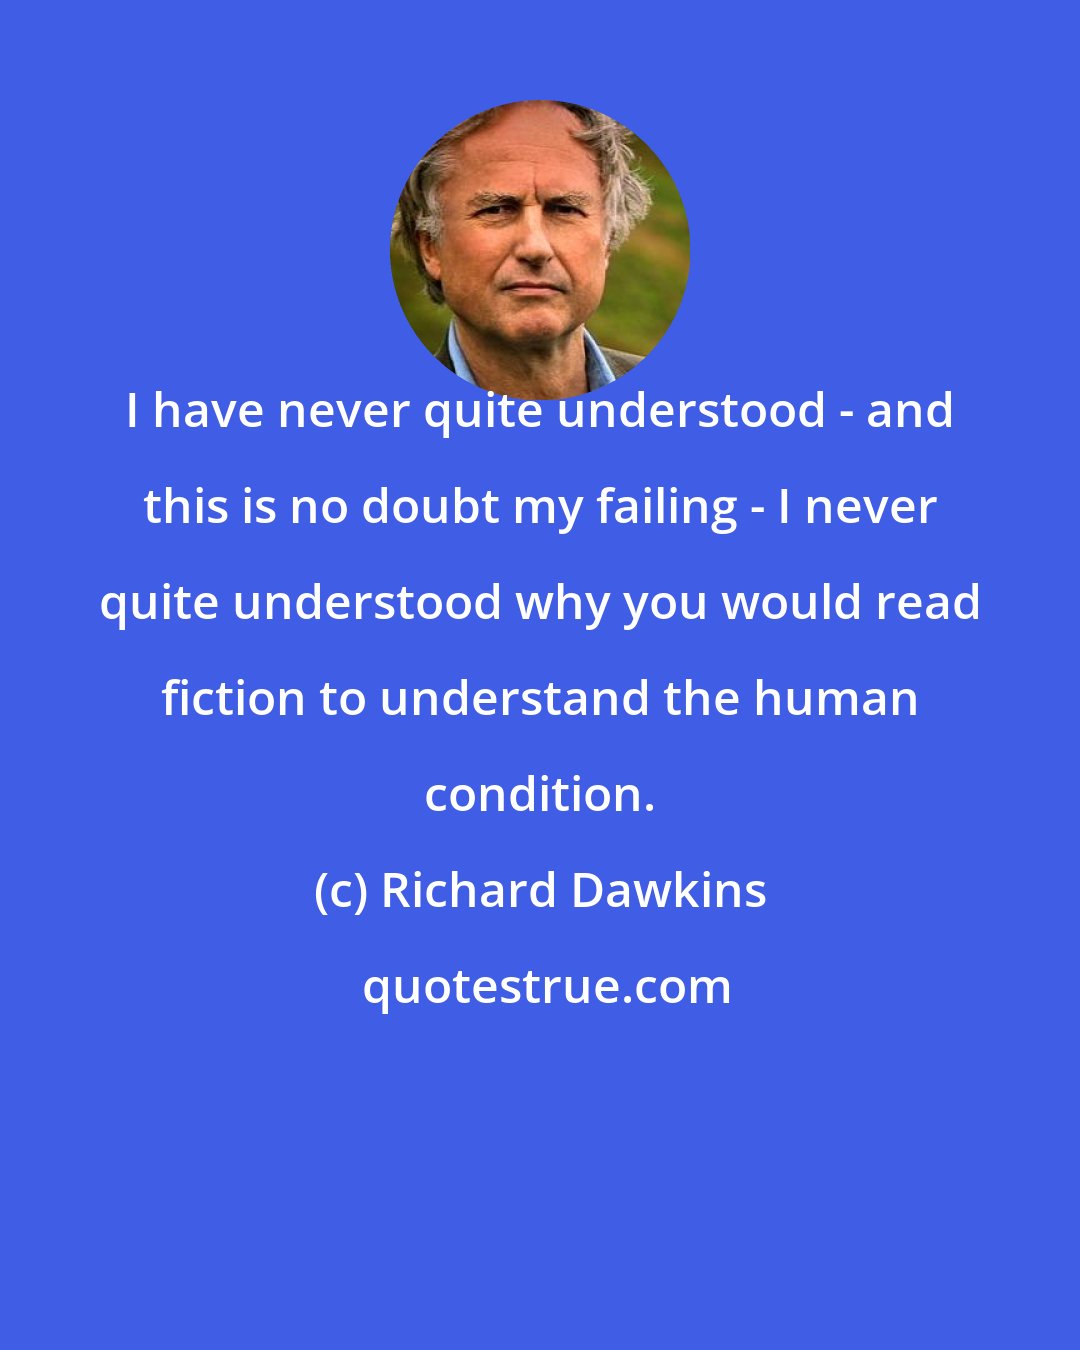 Richard Dawkins: I have never quite understood - and this is no doubt my failing - I never quite understood why you would read fiction to understand the human condition.